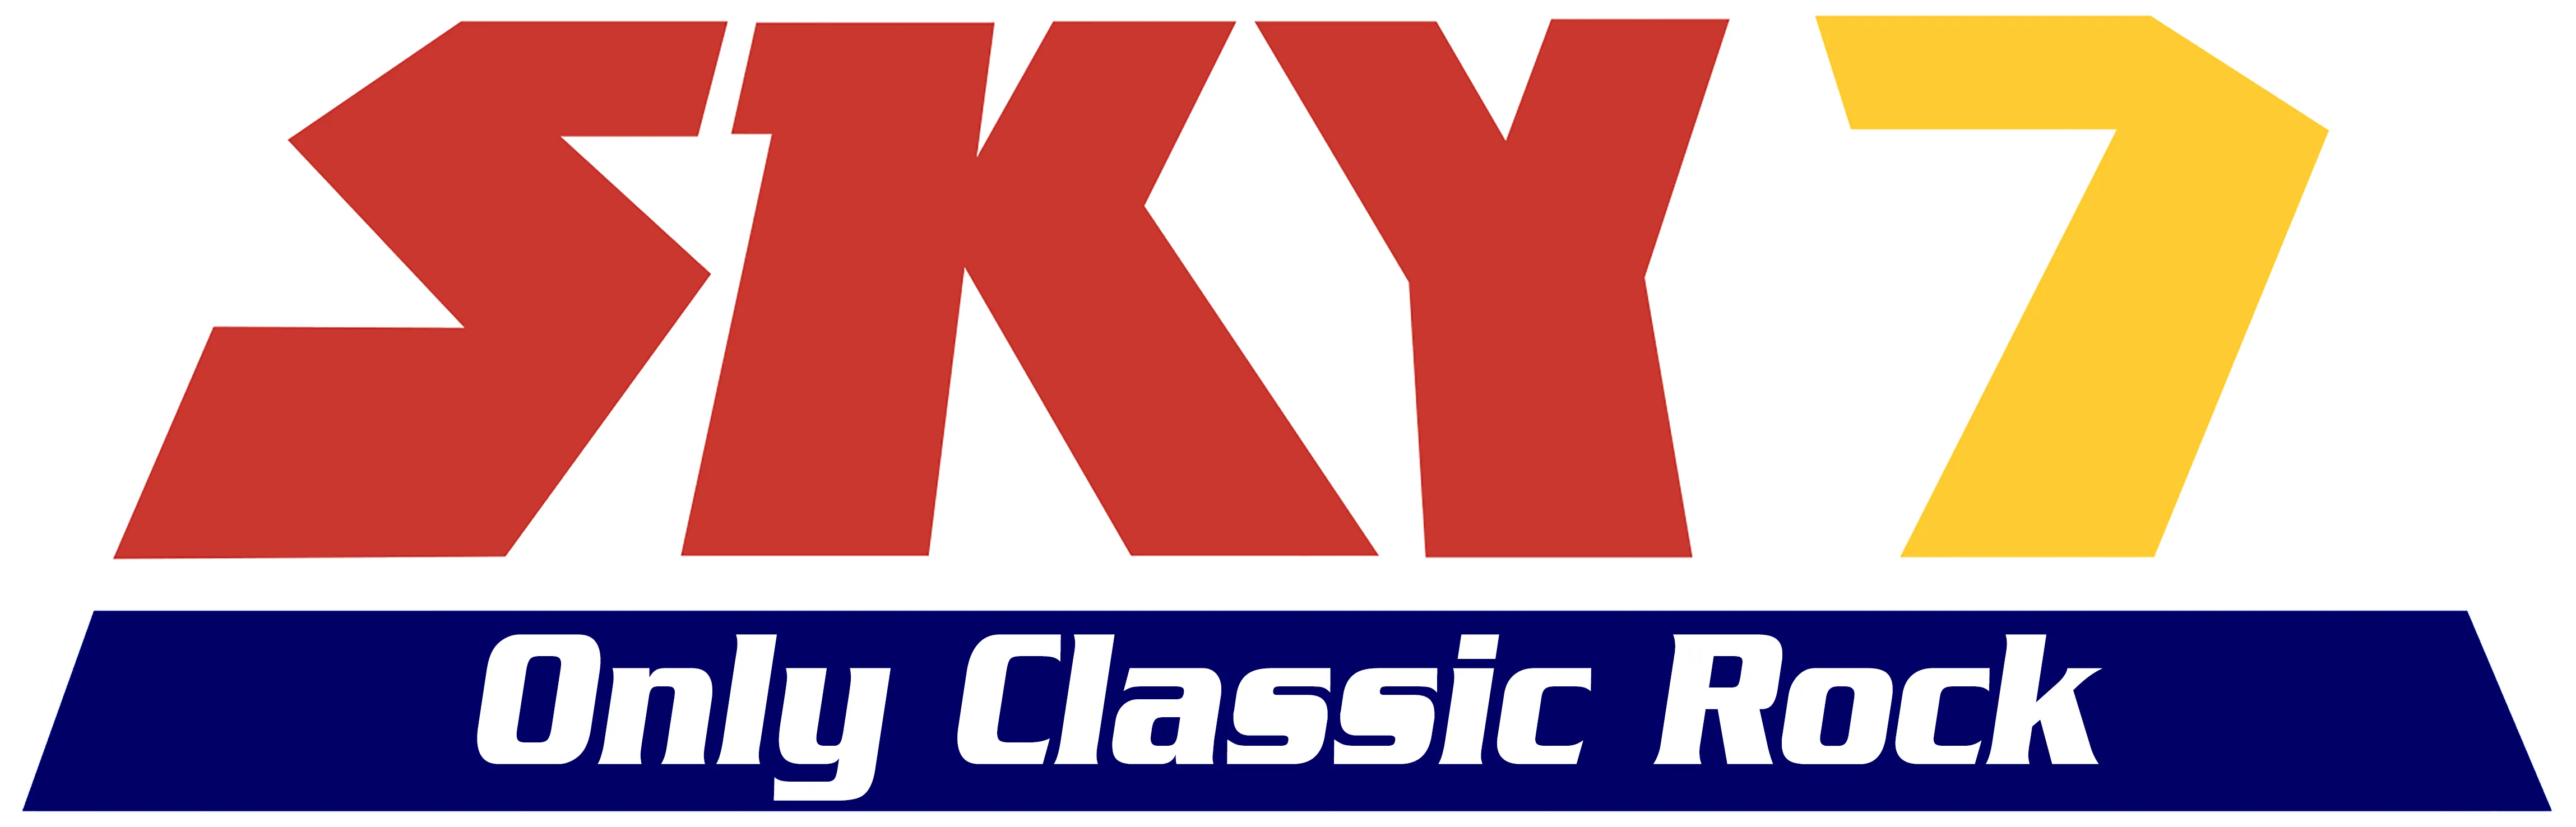 Image of SKY 7 Only Classic Rock logo